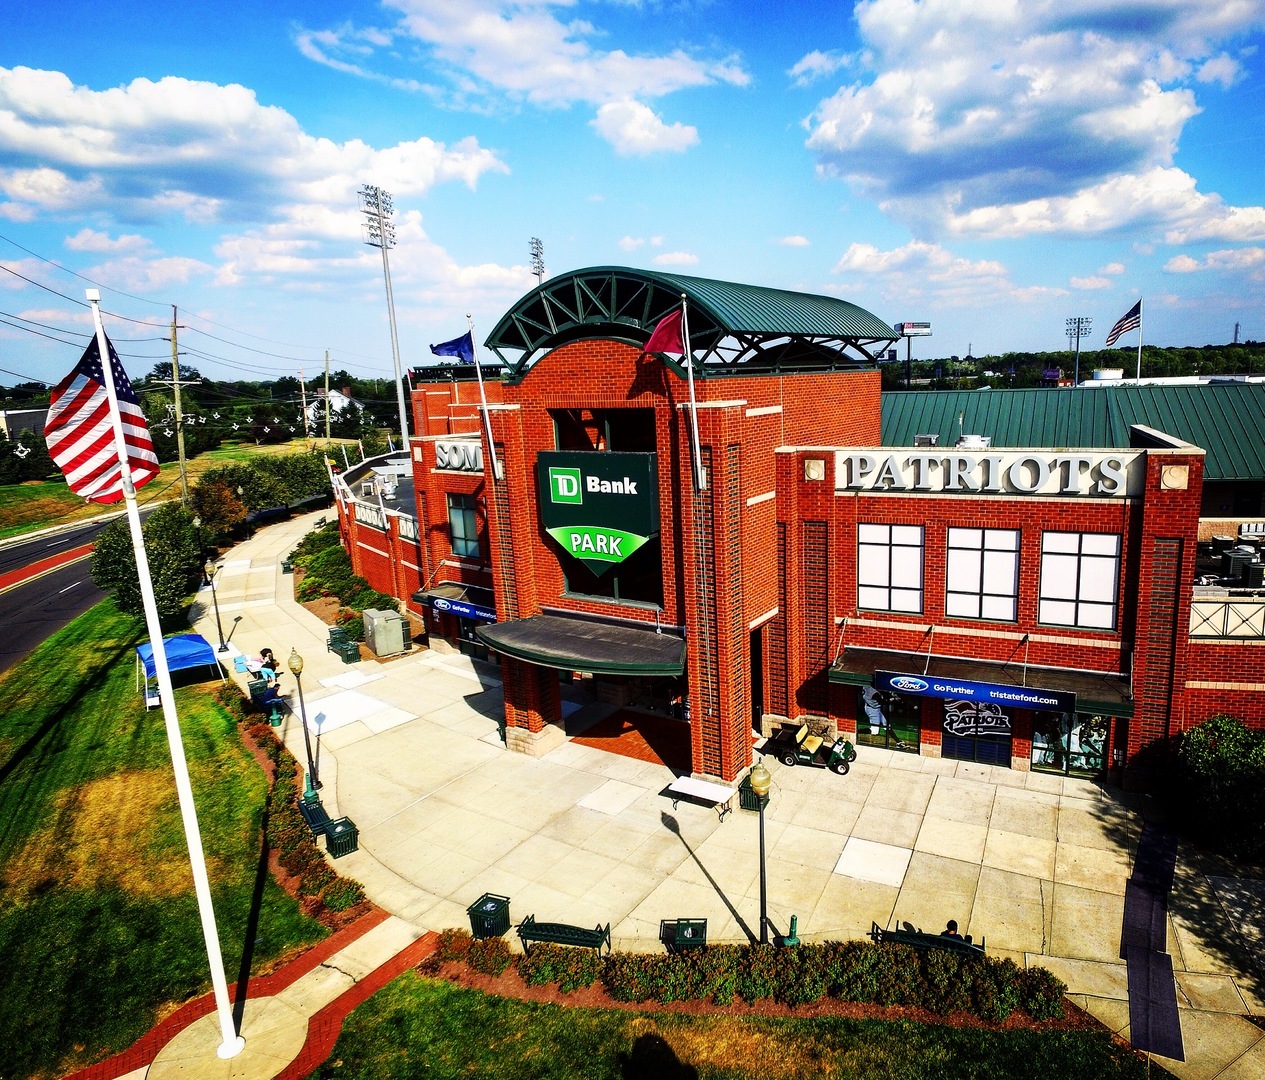 Live Baseball | Somerset Patriots (NYY) vs. New Hampshire Fisher Cats (TOR) - MiLB Double-A, Bridgewater Township, New Jersey, United States